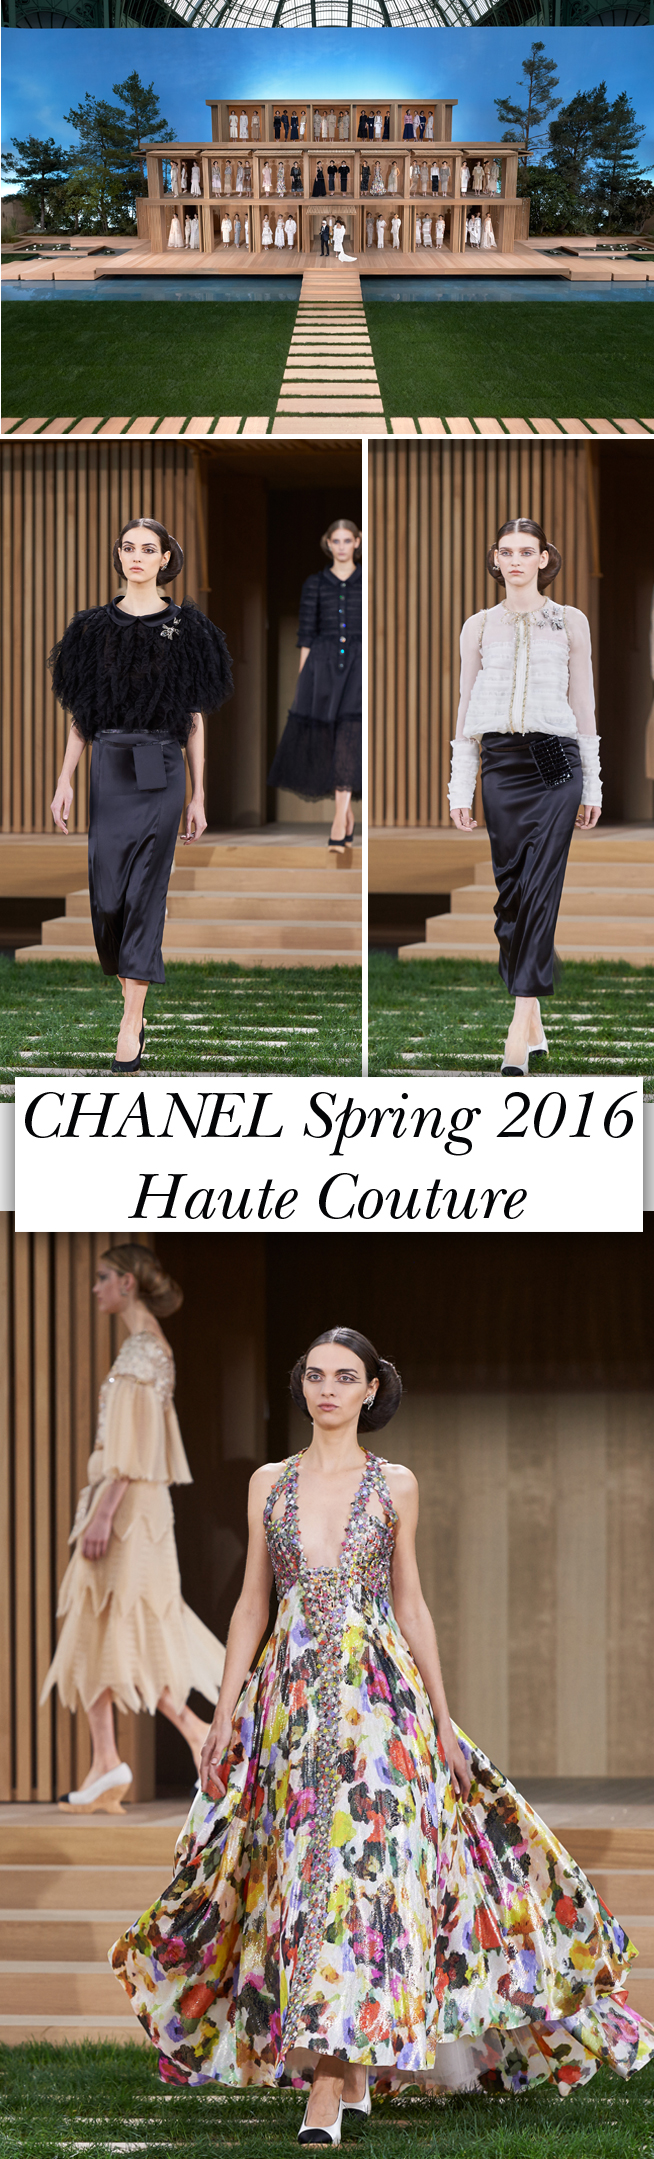 CHANEL SPRING 2016 HAUTE COUTURE